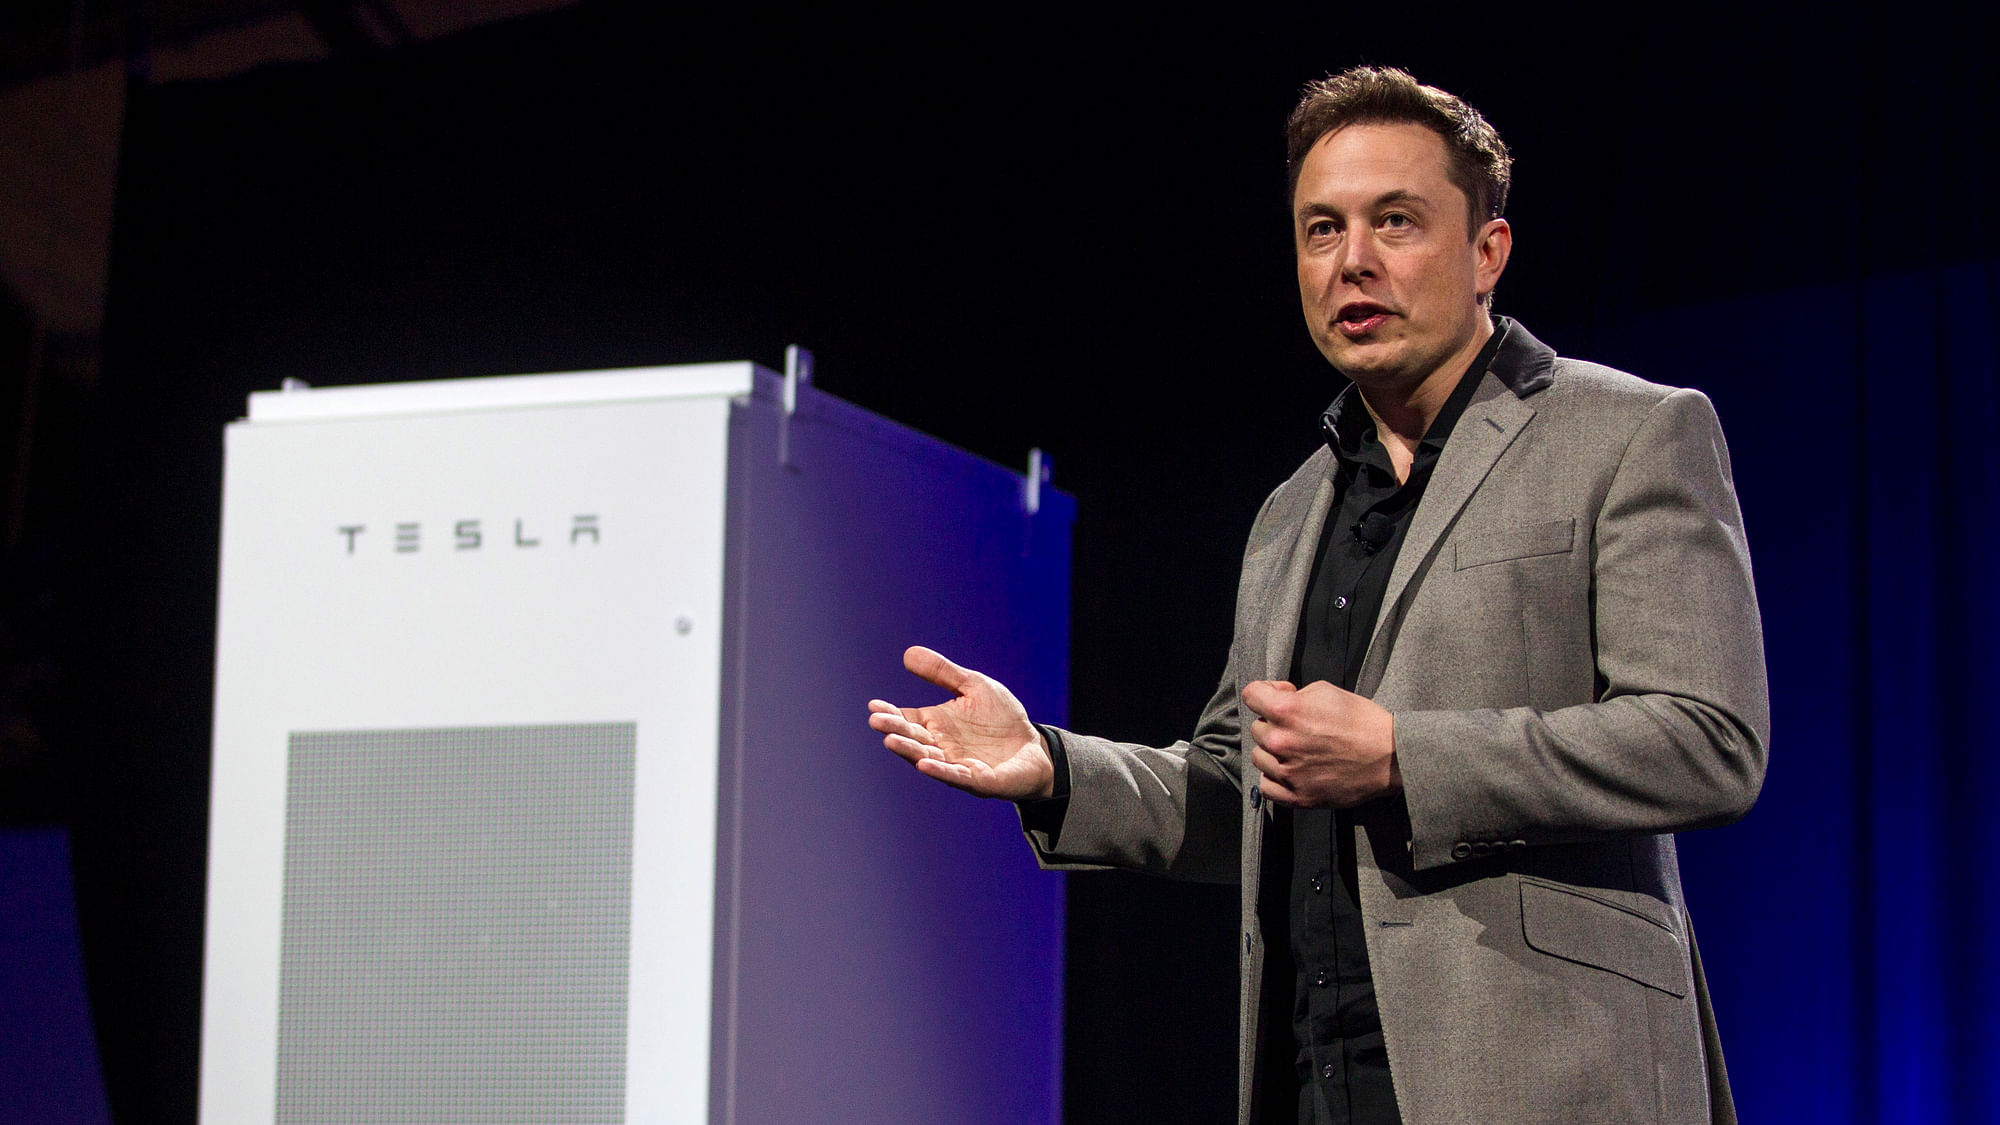 Elon Musk, CEO of Tesla Motors, says the company expects to get approvals by 2020.&nbsp;